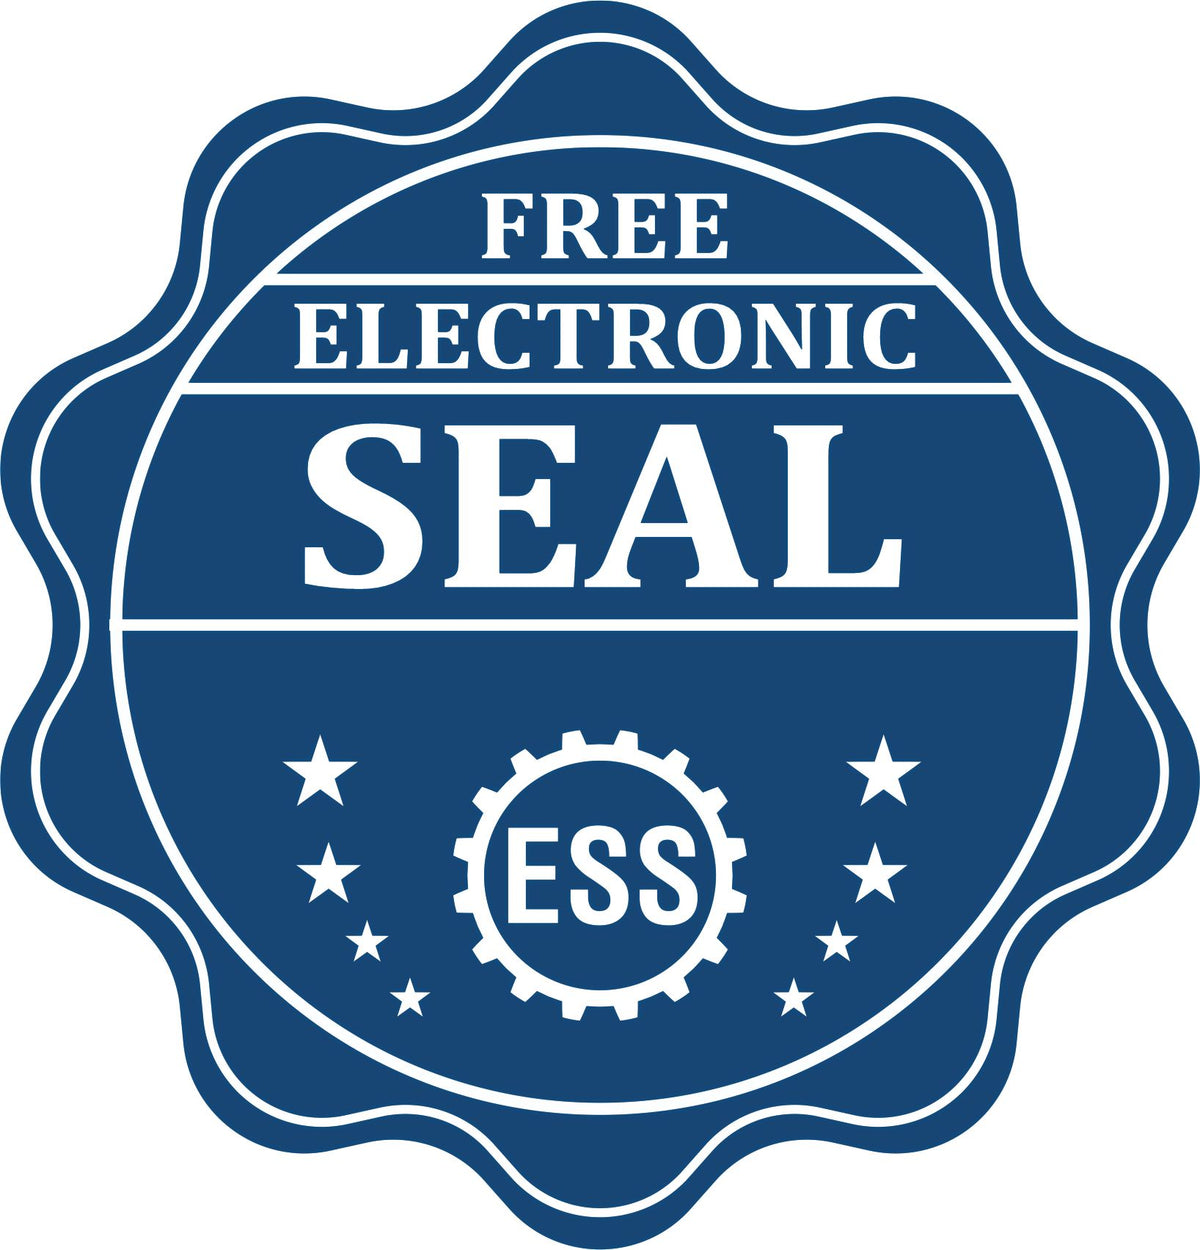 A badge showing a free electronic seal for the Extended Long Reach Massachusetts Surveyor Embosser with stars and the ESS gear on the emblem.